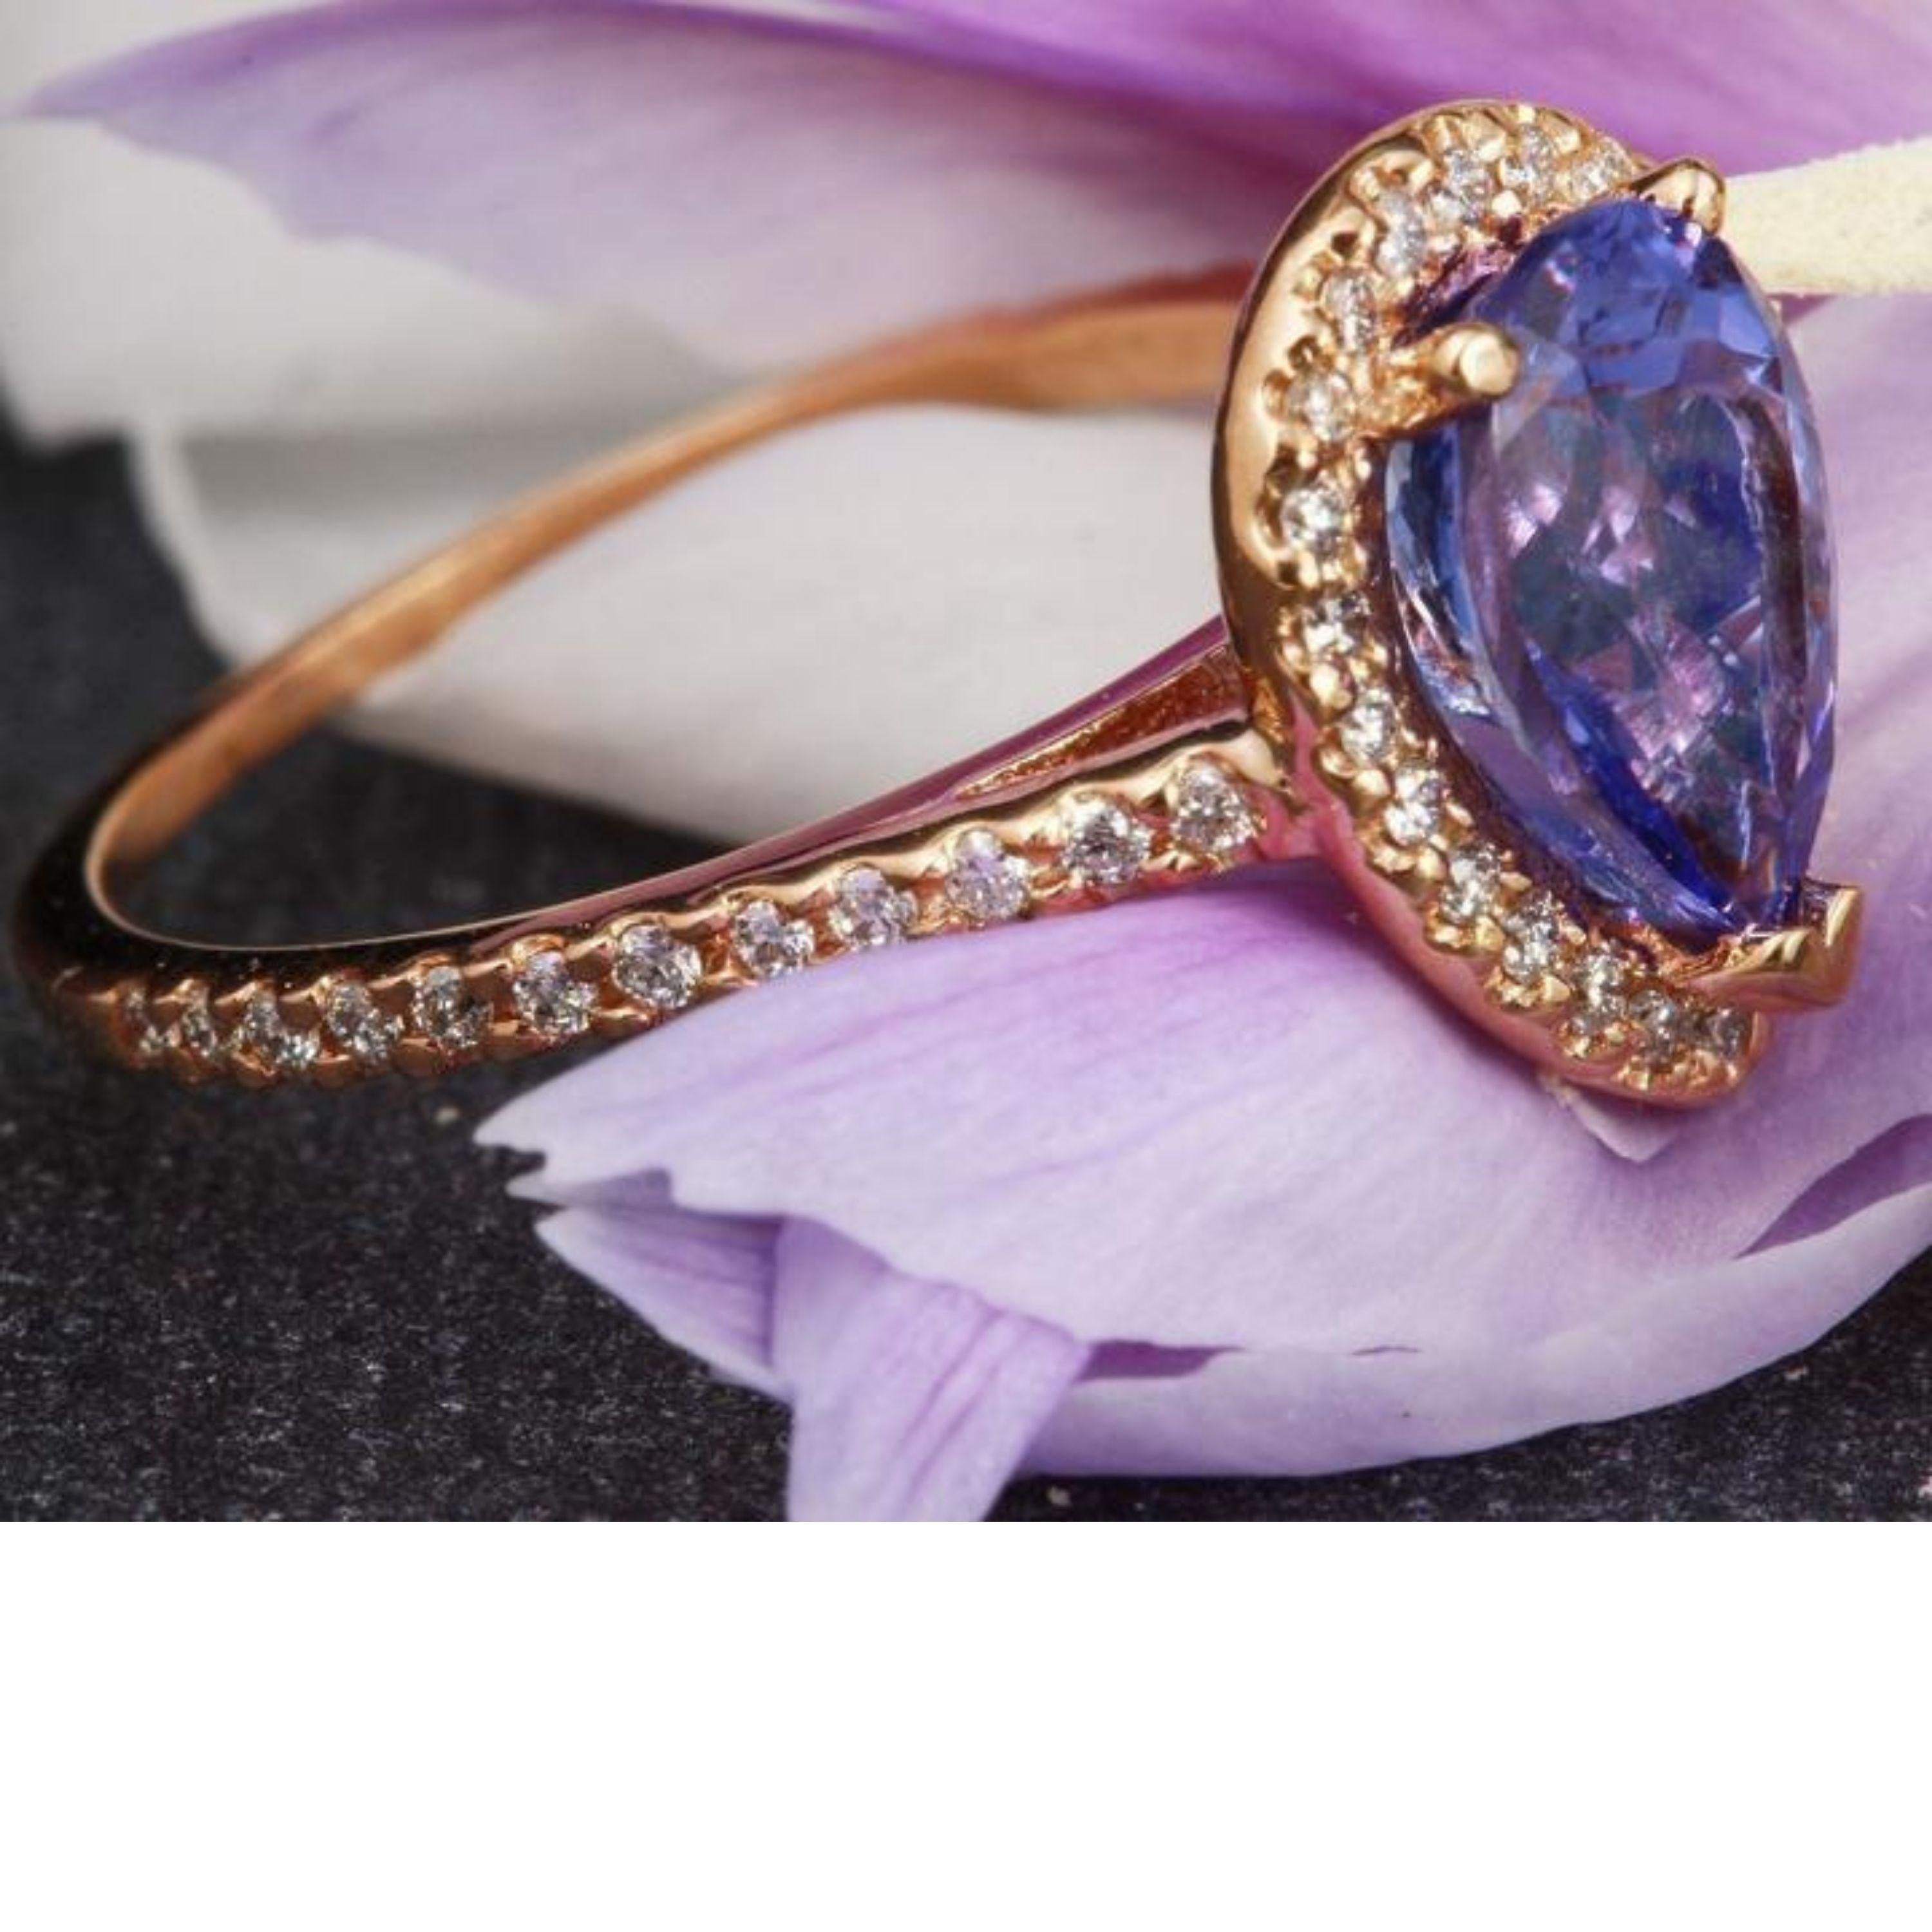 2.05 Carats Natural Very Nice Looking Tanzanite and Diamond 14K Solid Rose Gold Ring

Total Natural Pear Cut Tanzanite Weight is: 1.60 Carats

Natural Round Diamonds Weight: Approx. 0.45 Carats (color G-H / Clarity SI)

Ring size: 7 (we offer free